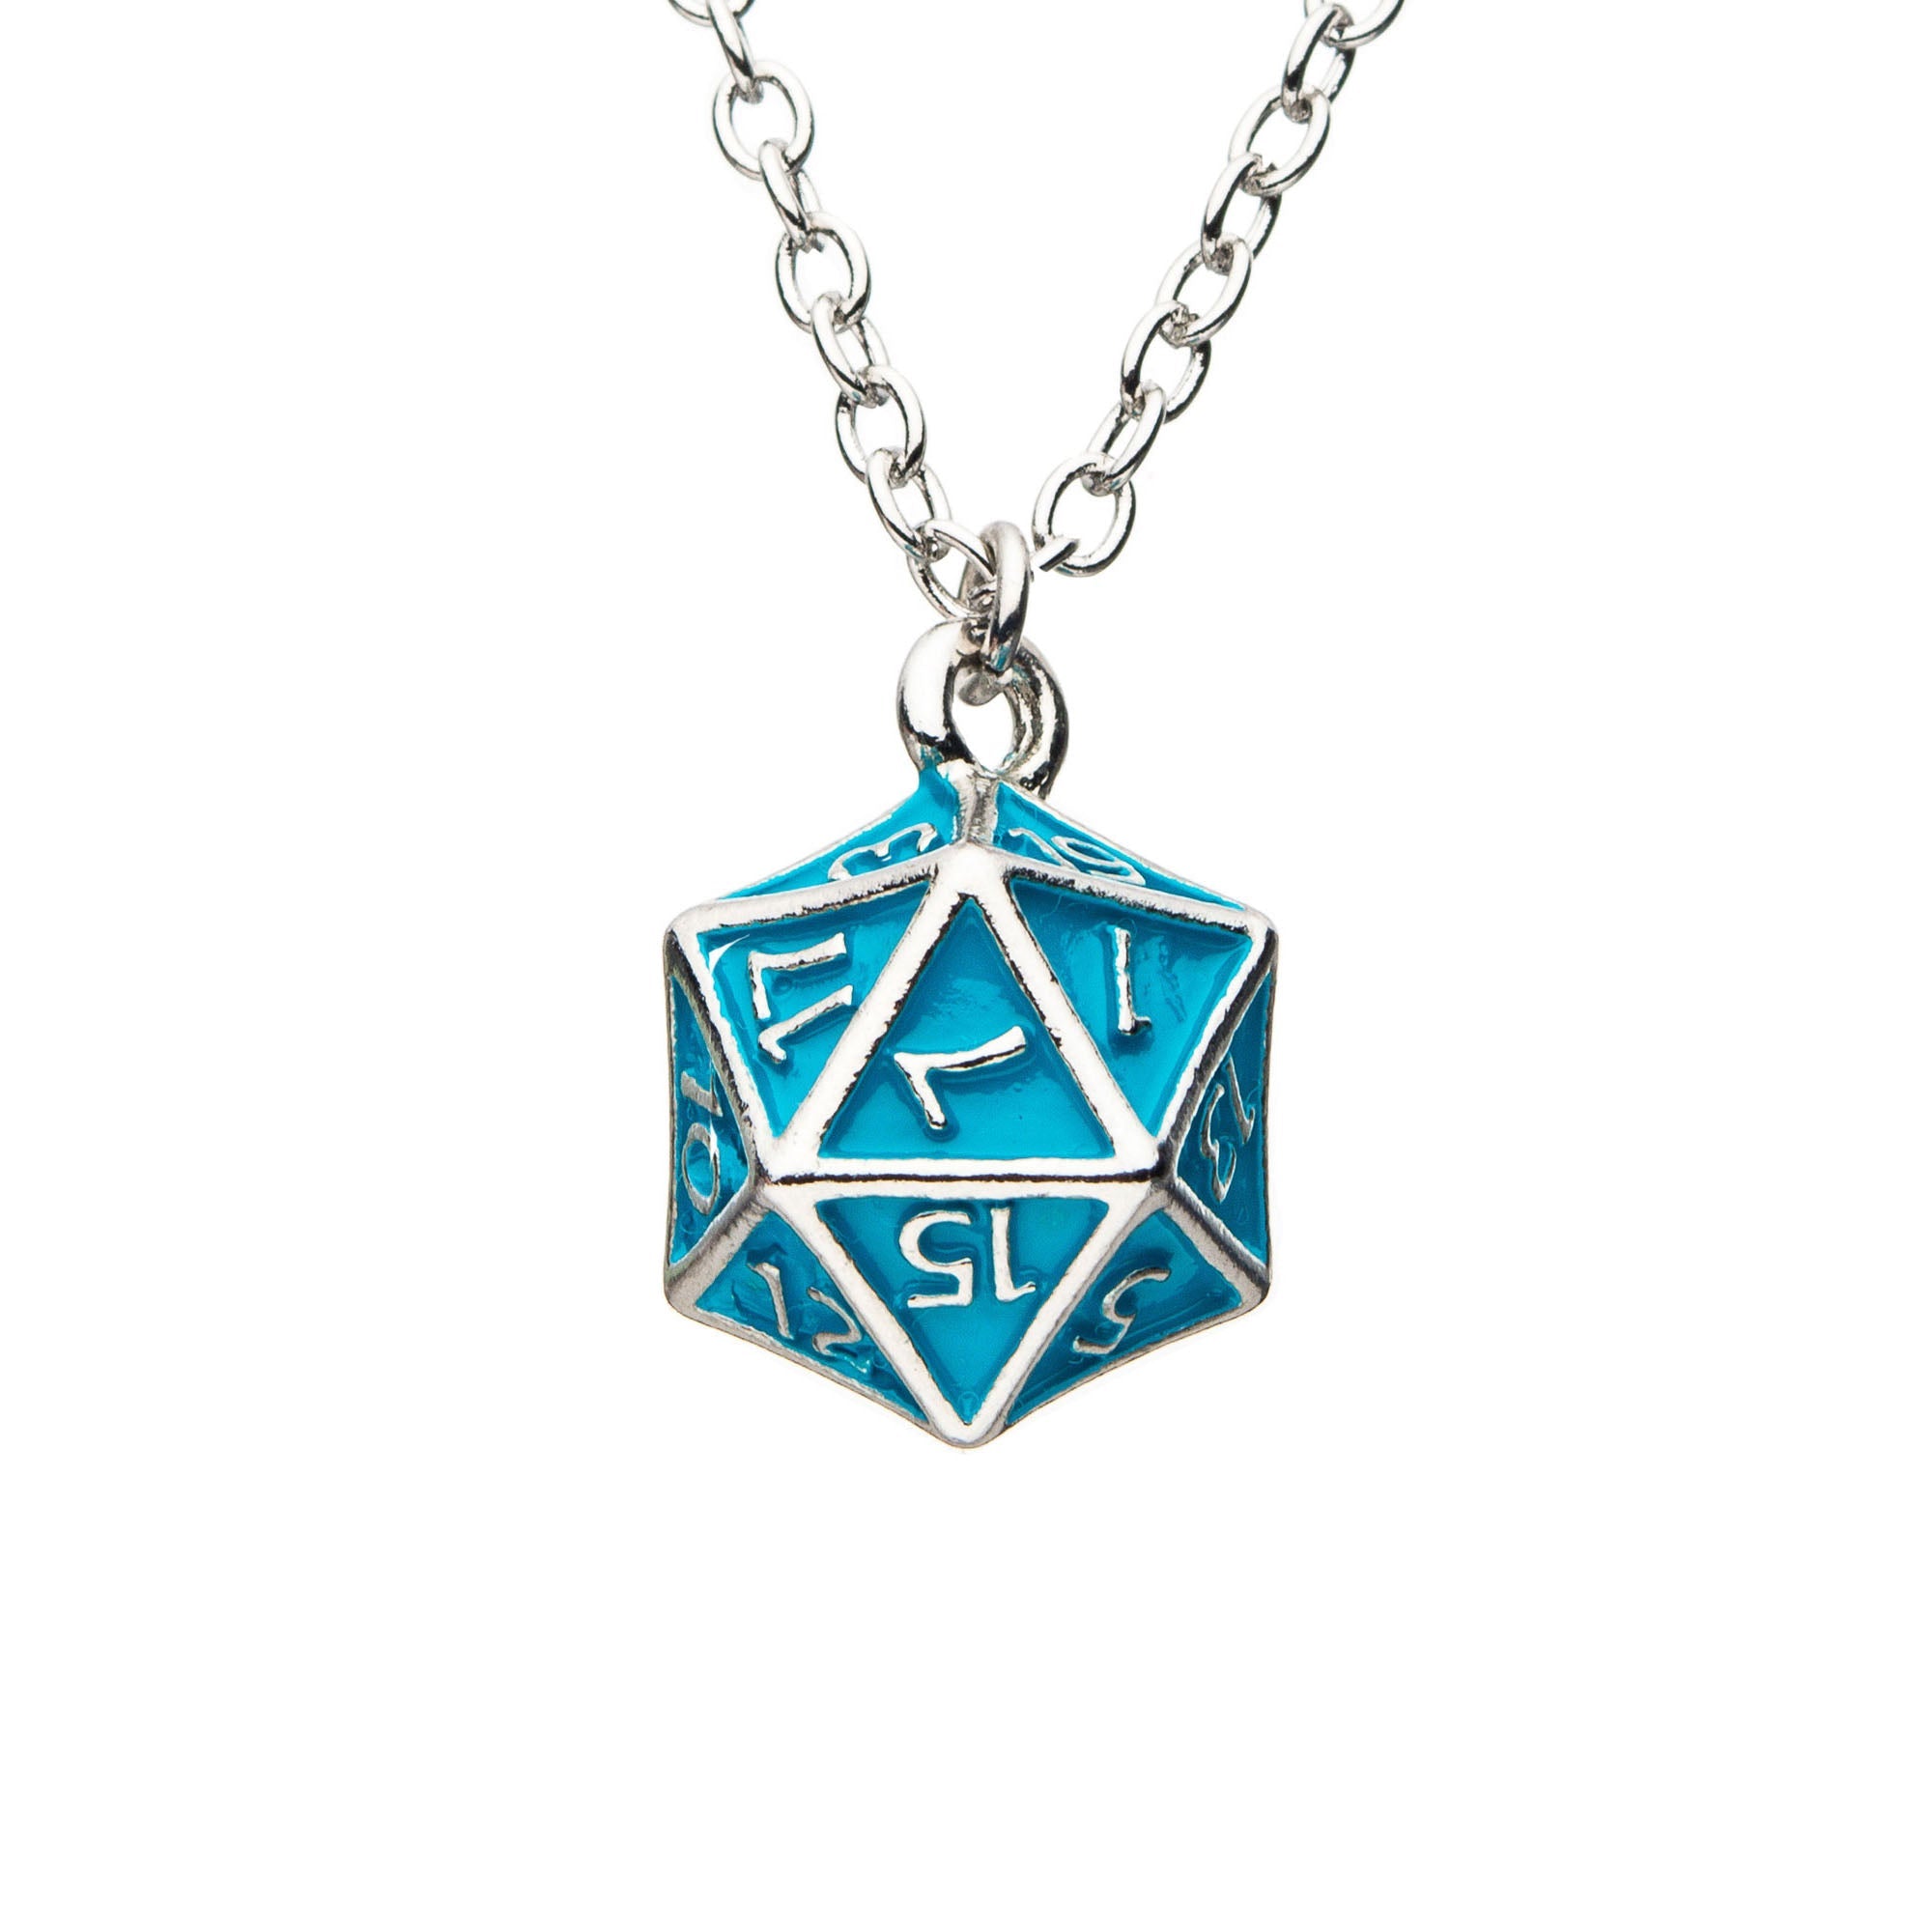 Hasbro Dungeons & Dragons D20 Dice Pendant Necklace